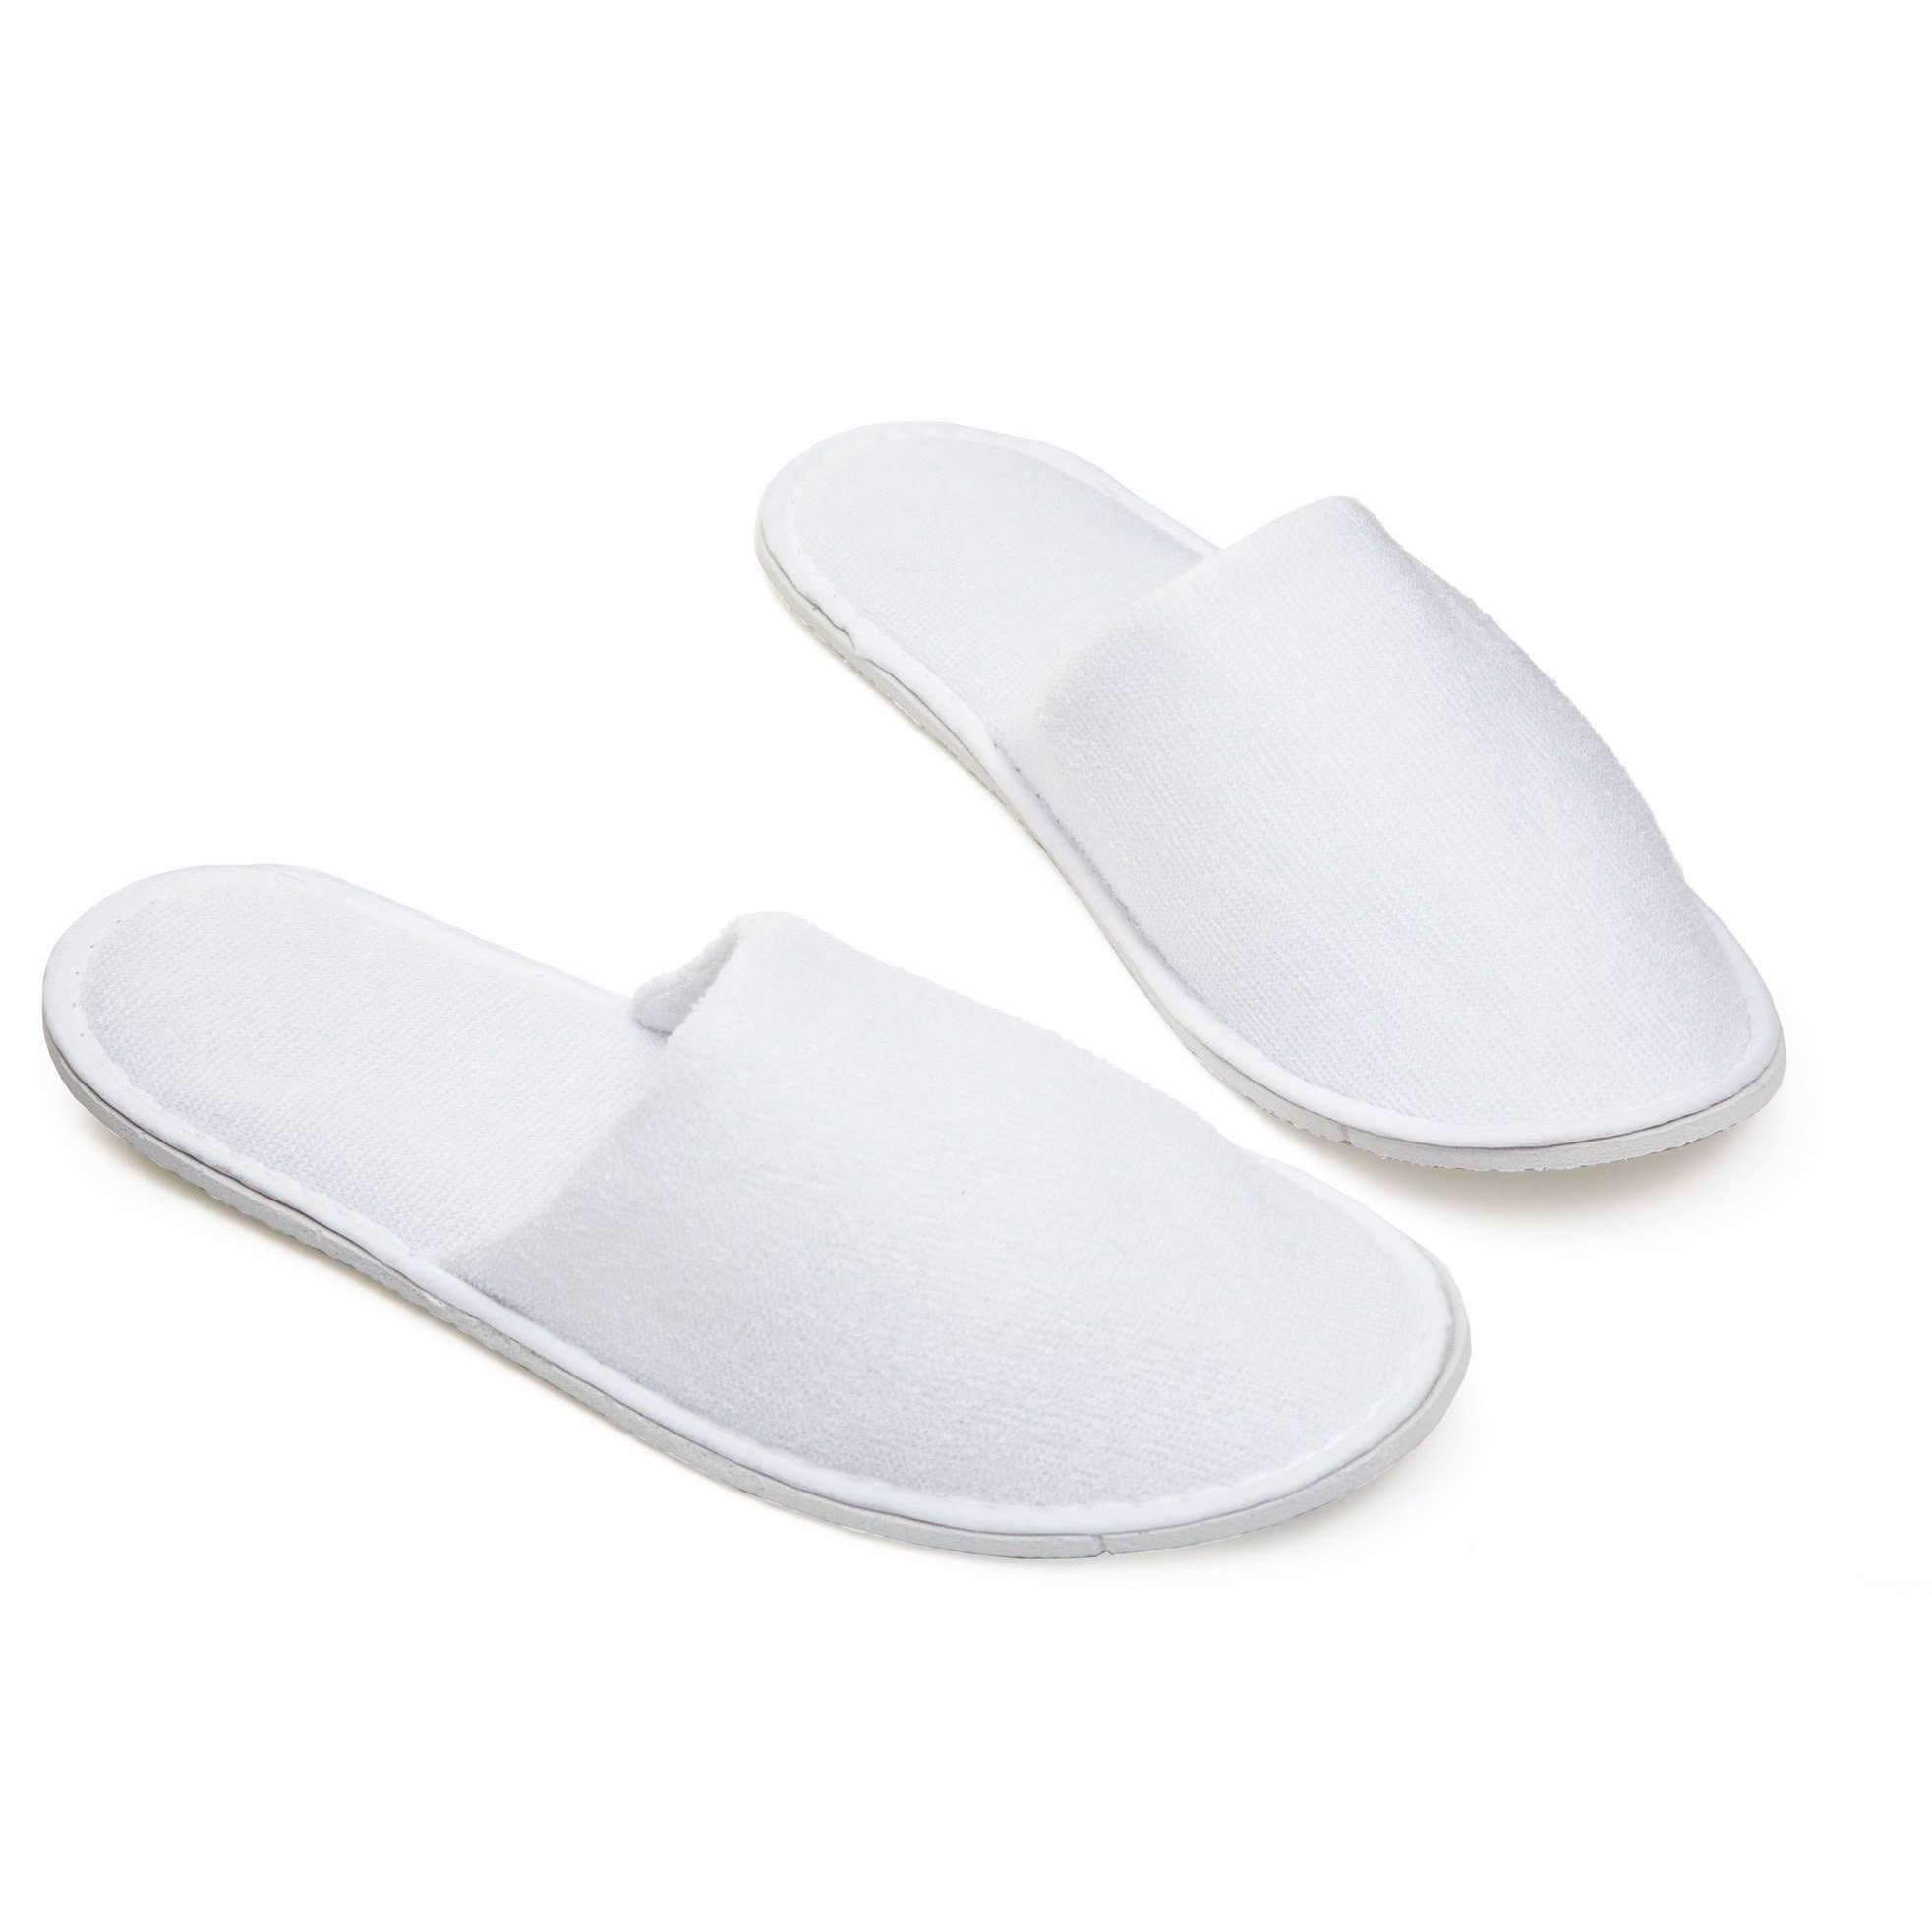 Hotel Slippers with rubber base – SubliBlanks Limited